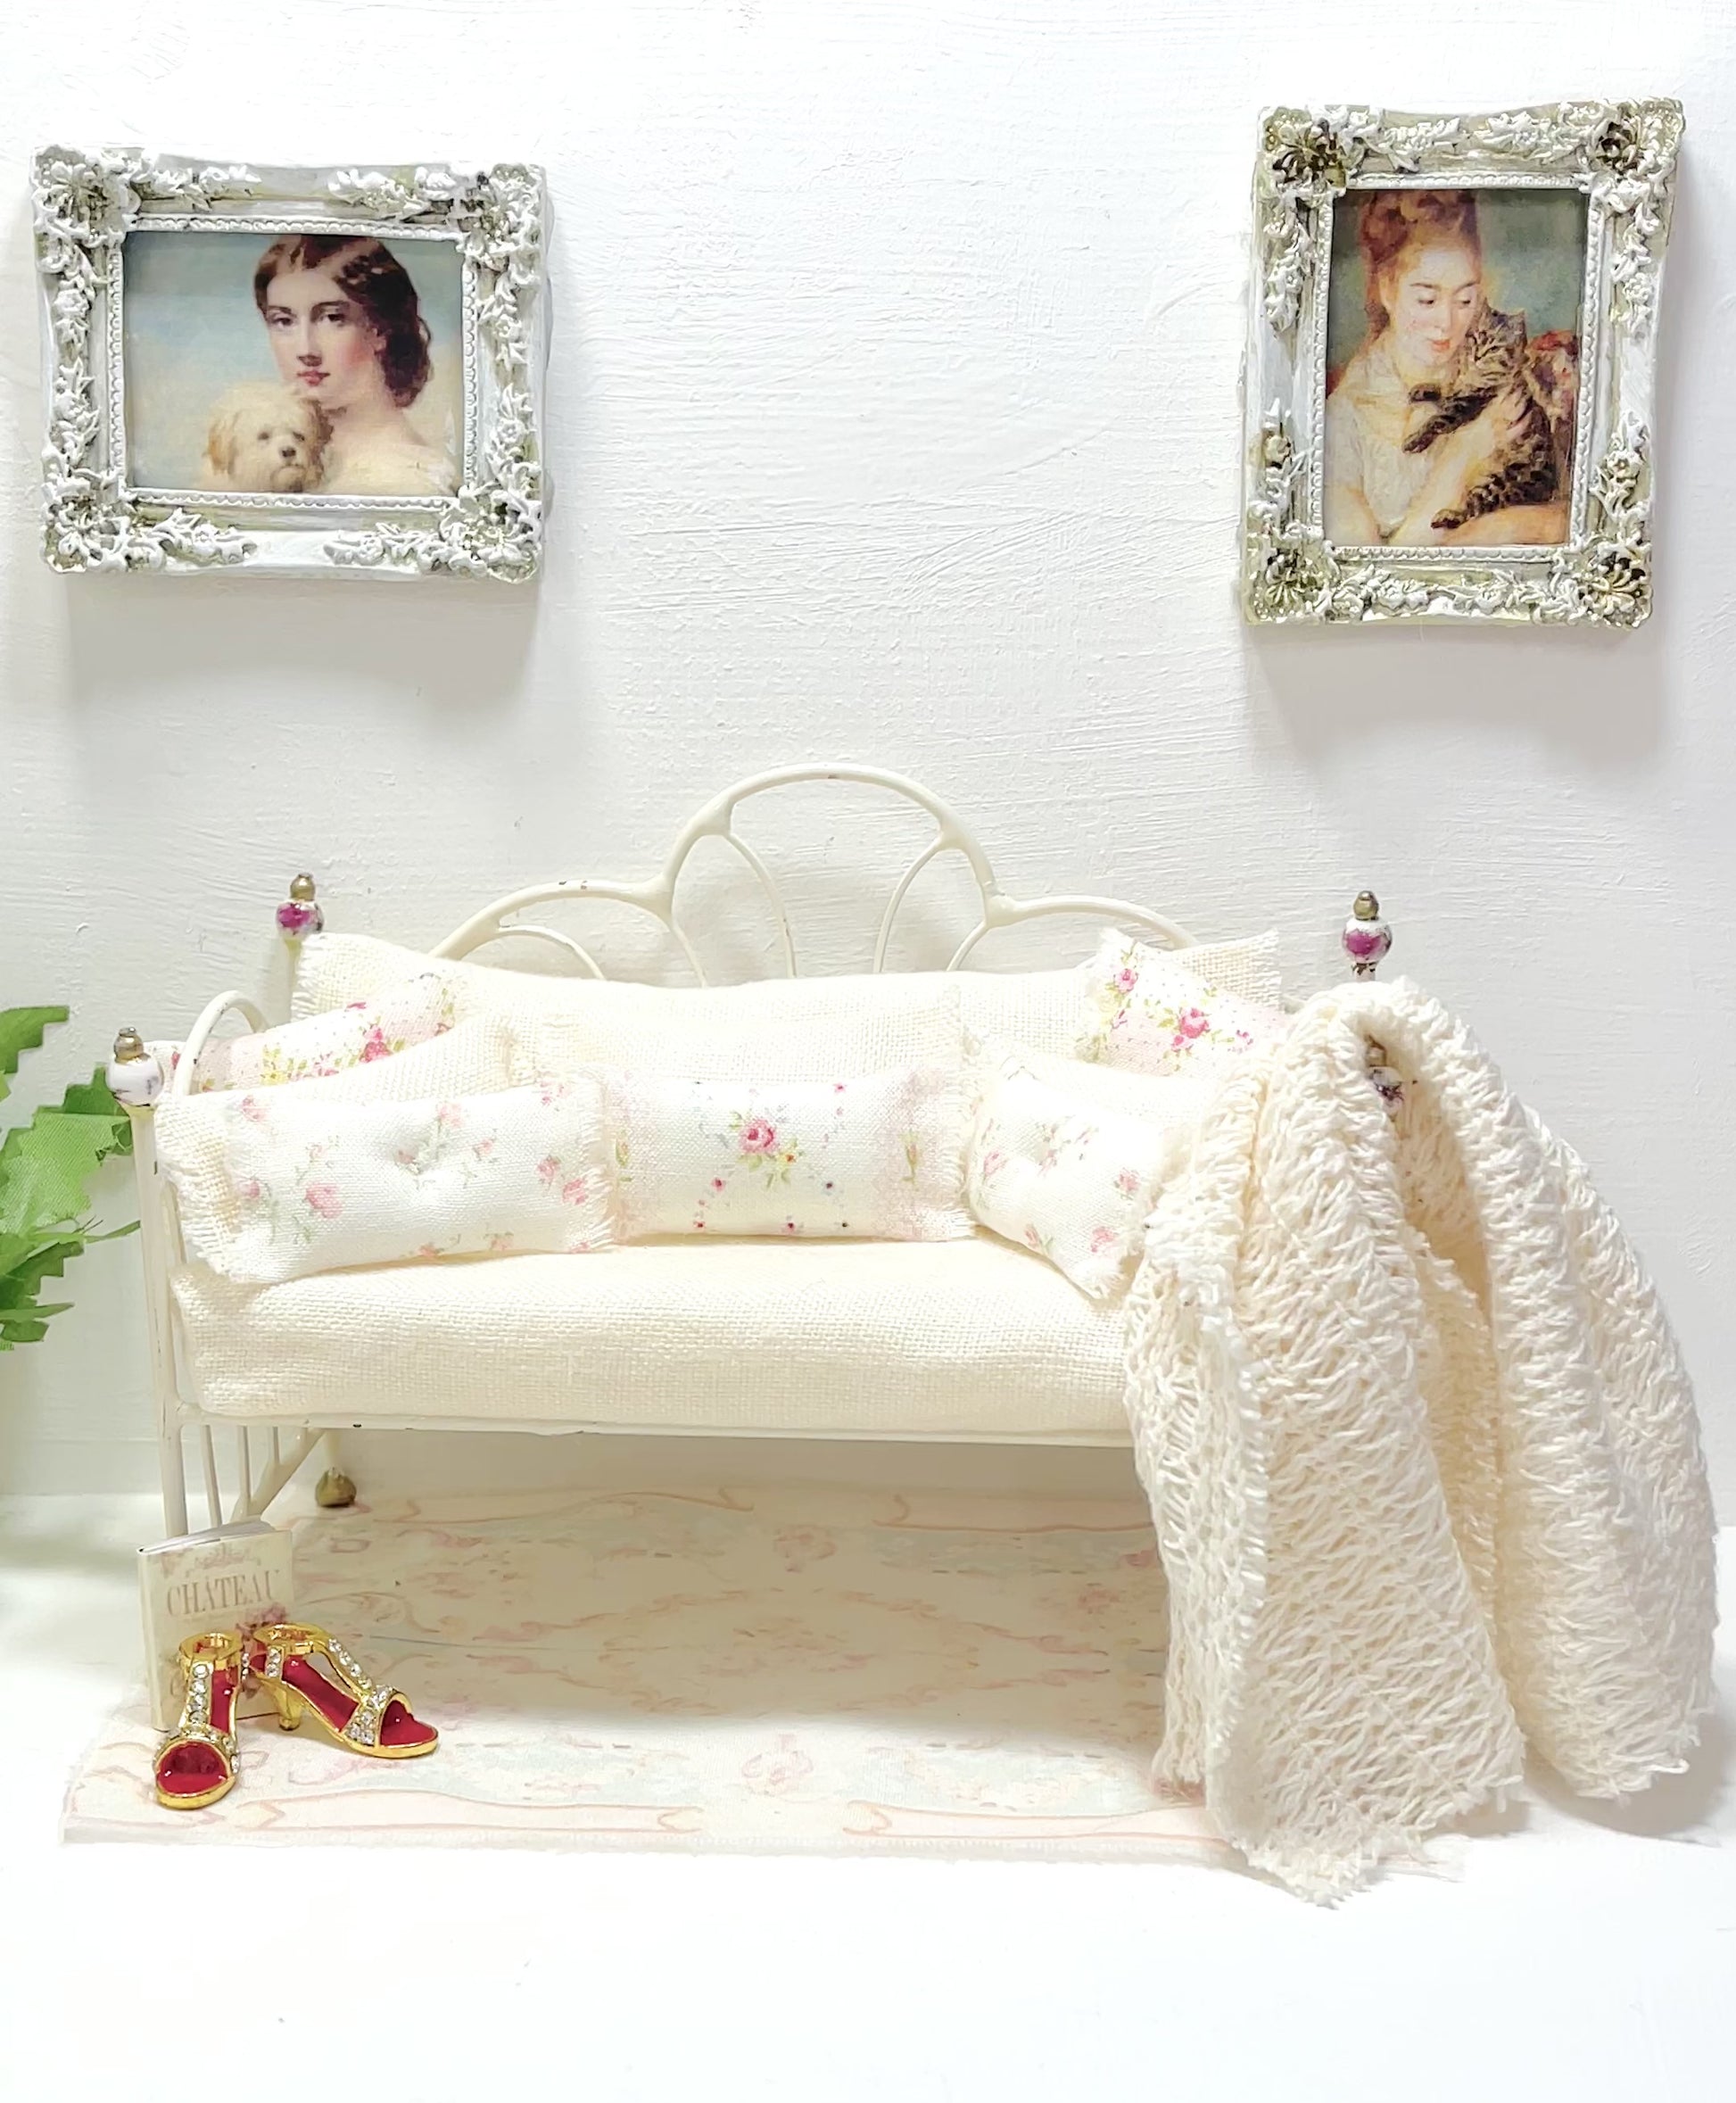 video of floralvintaghe cream daybed set from chantallena doll house